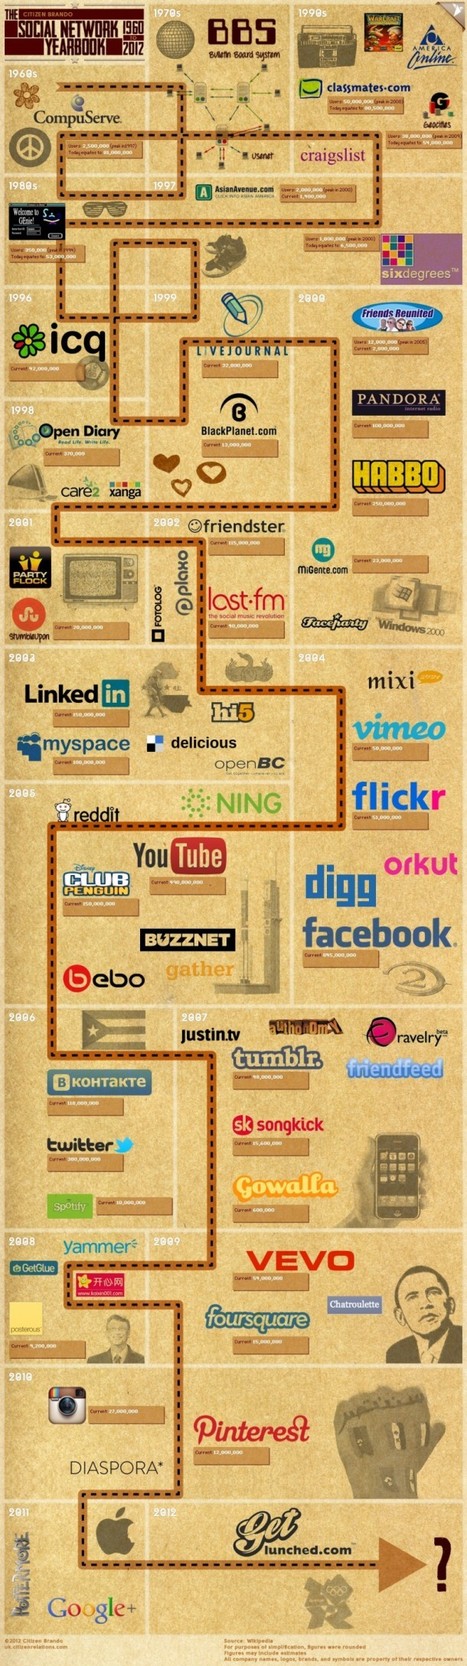 The Complete Timeline Of Social Networks, 1960-2012 [INFOGRAPHIC] | Daily Magazine | Scoop.it